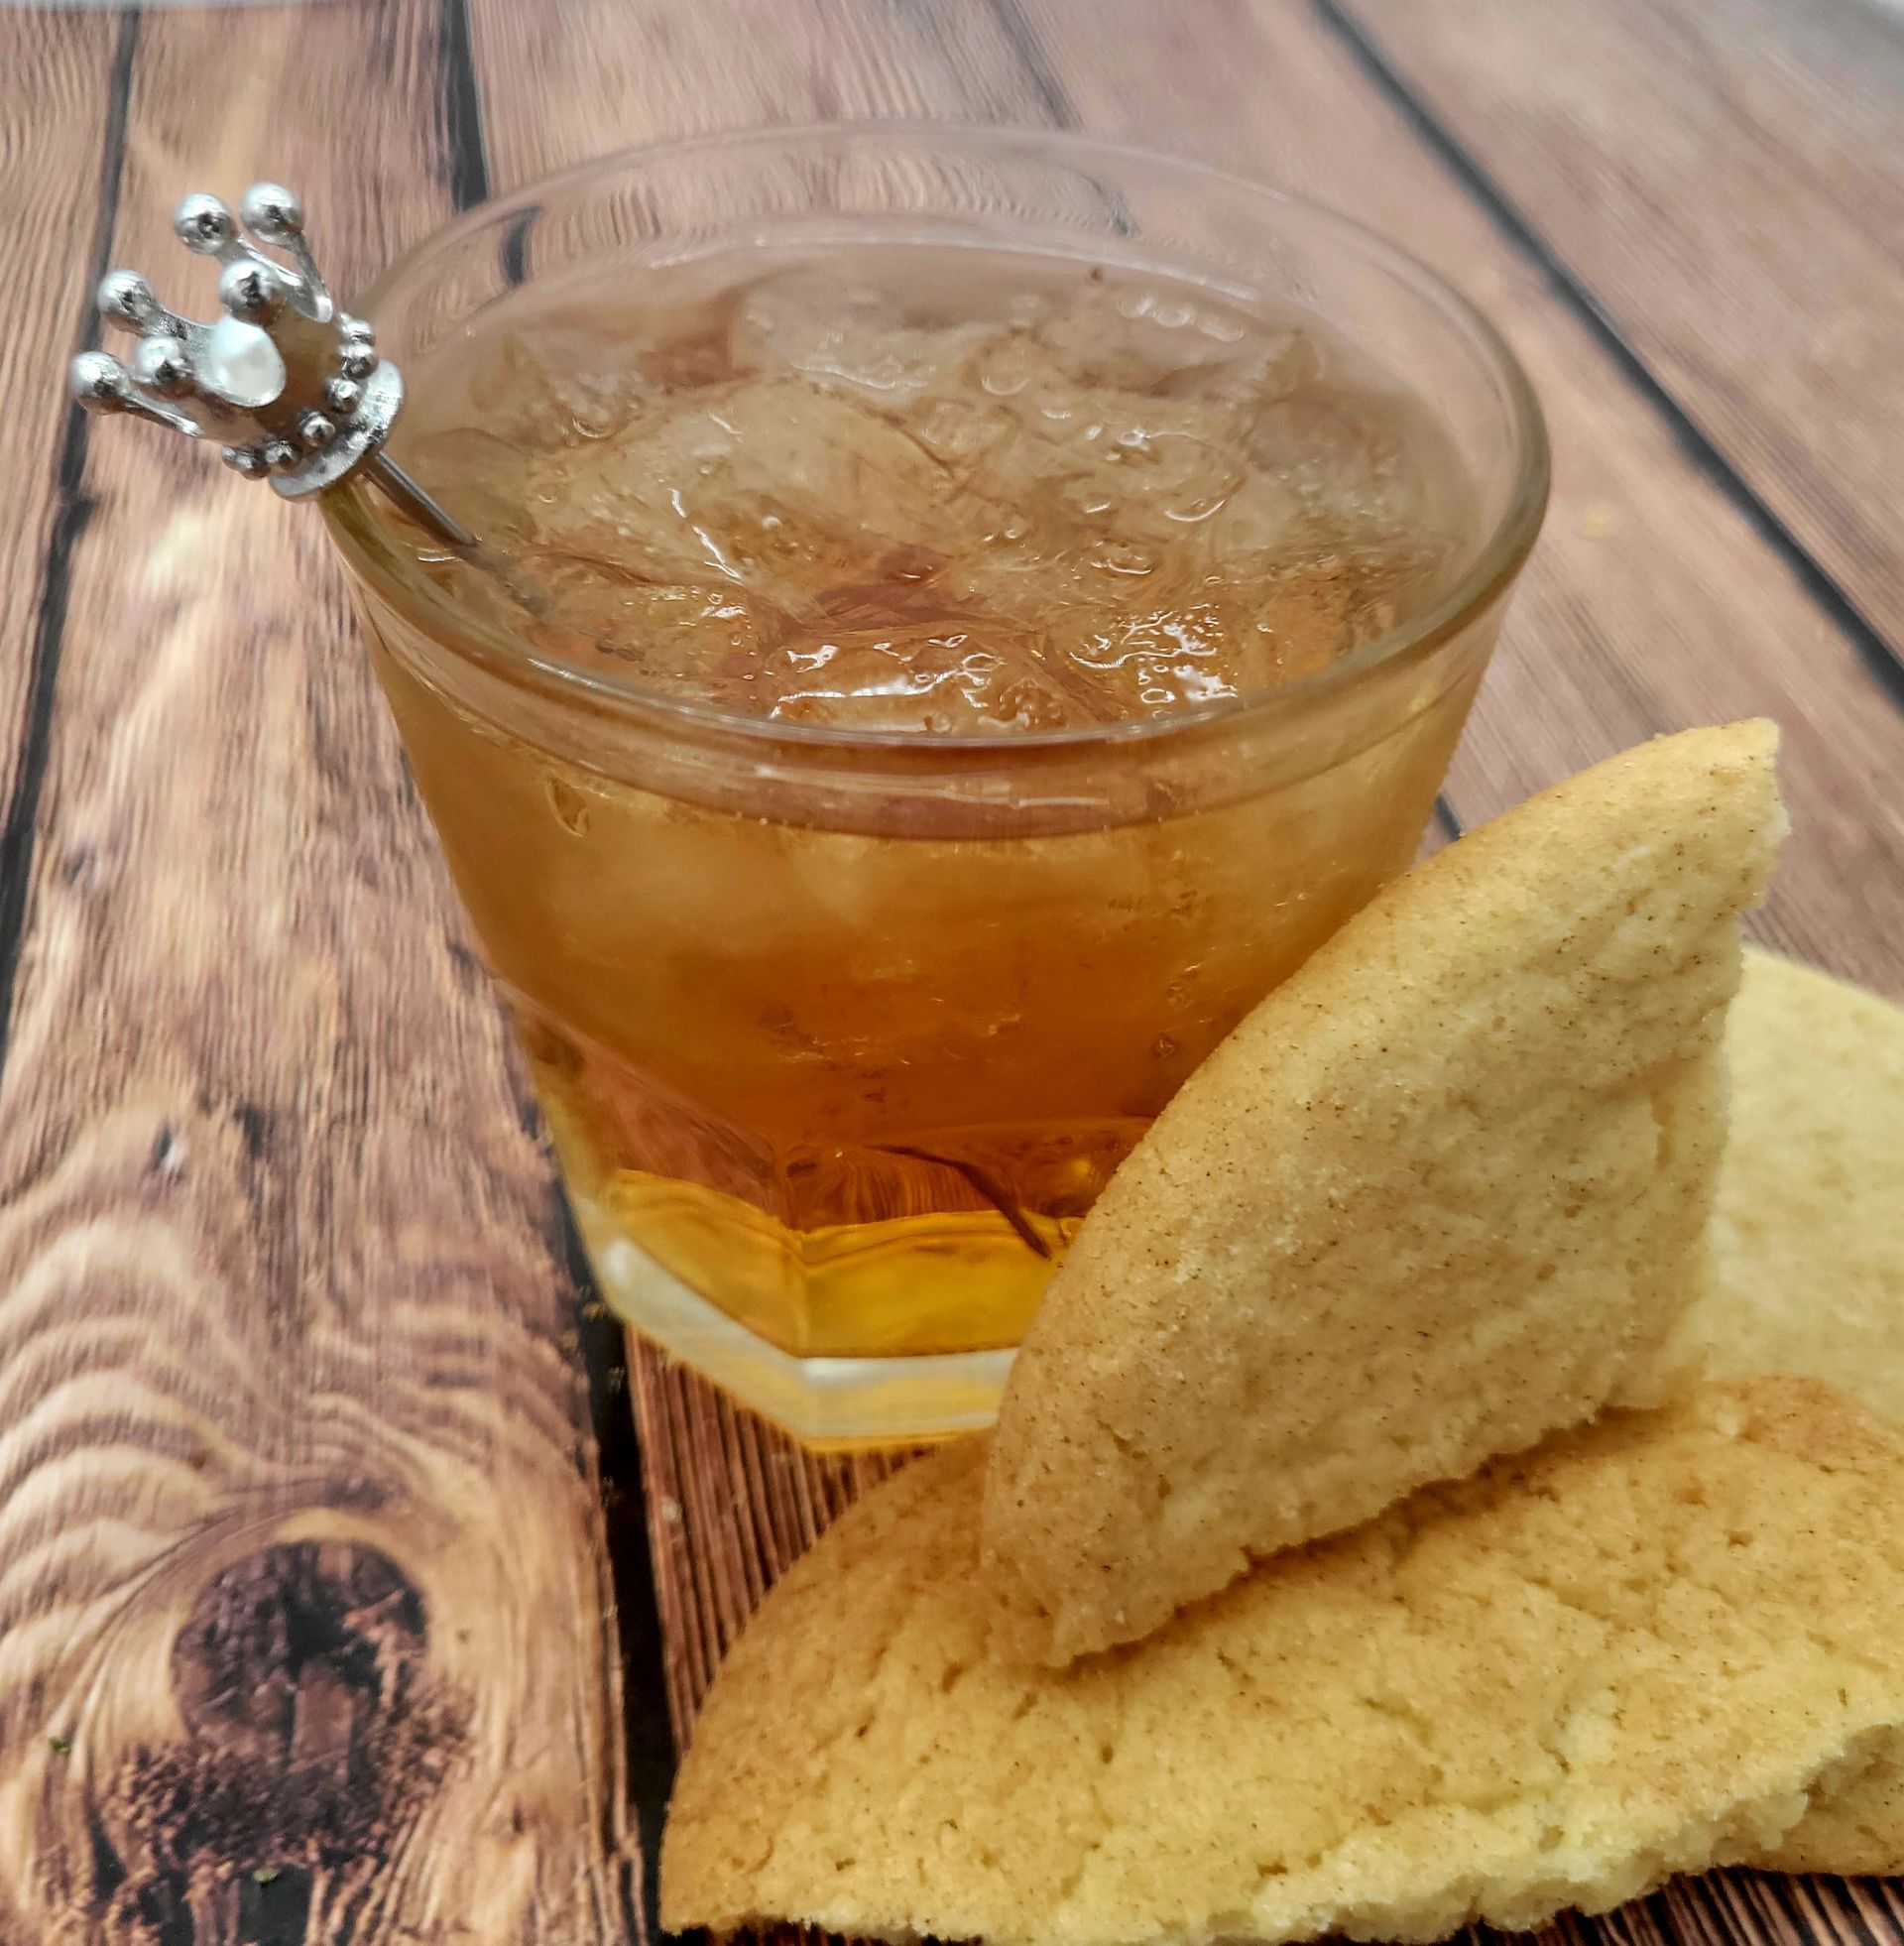 A glass of alcohol with a silver crown and cookies on wooden table.